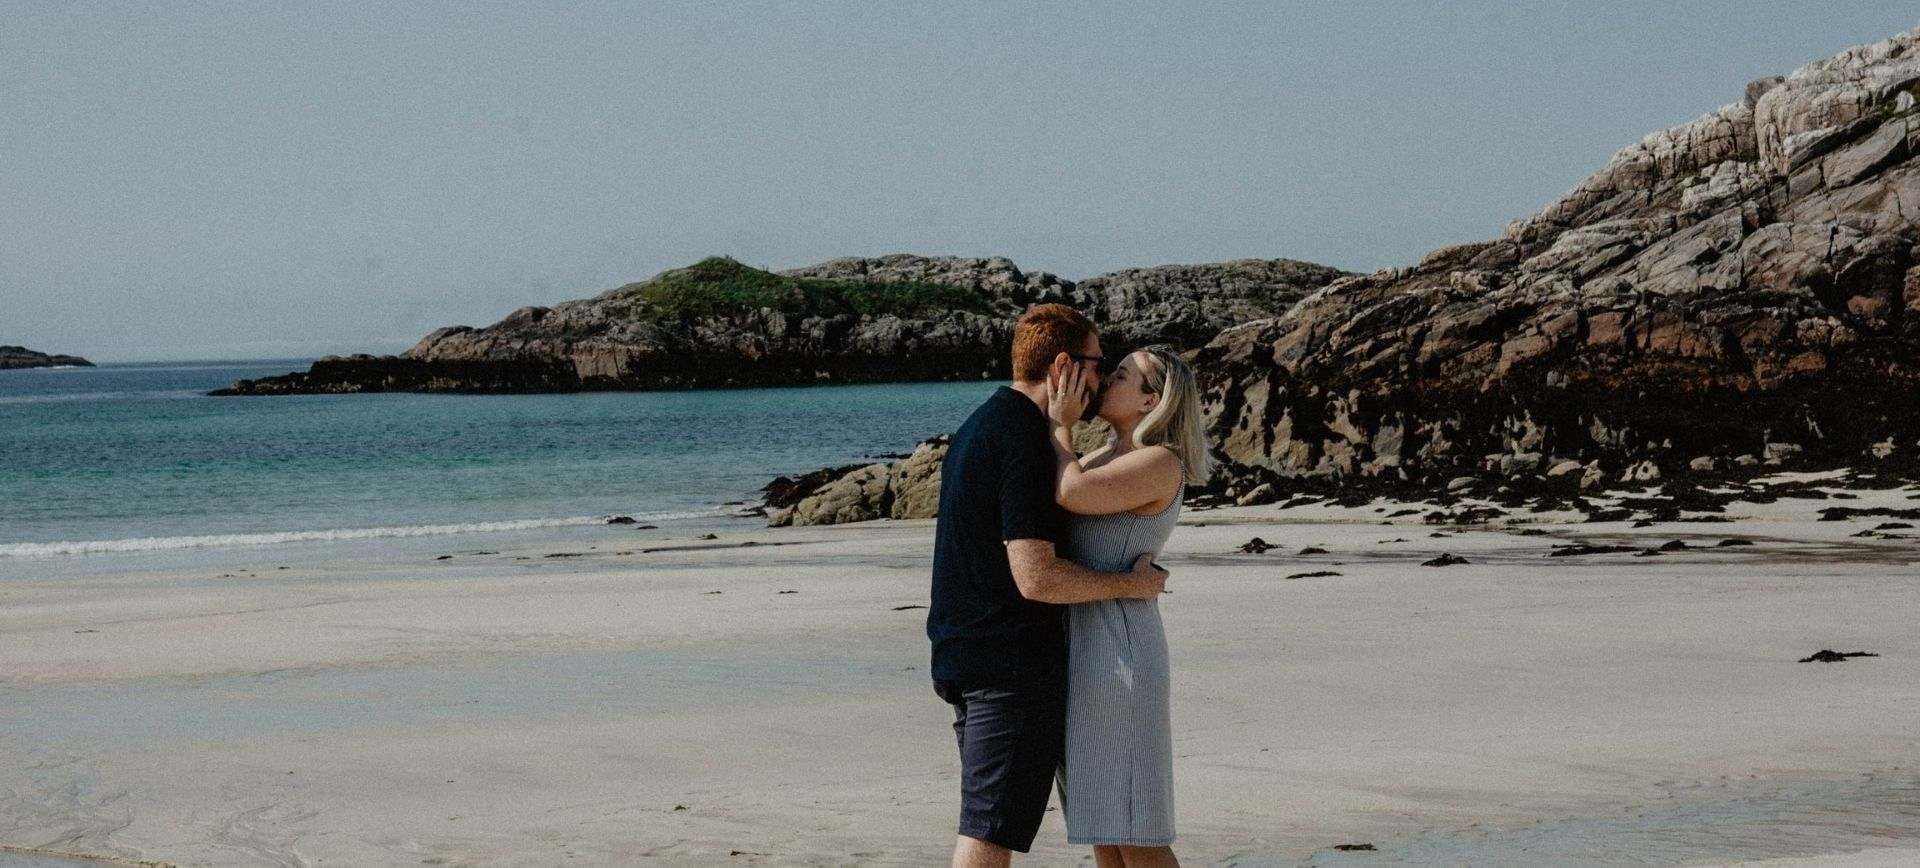 beach proposal on isle of lewis in scotland - couple engagement photoshoot with surprise proposal